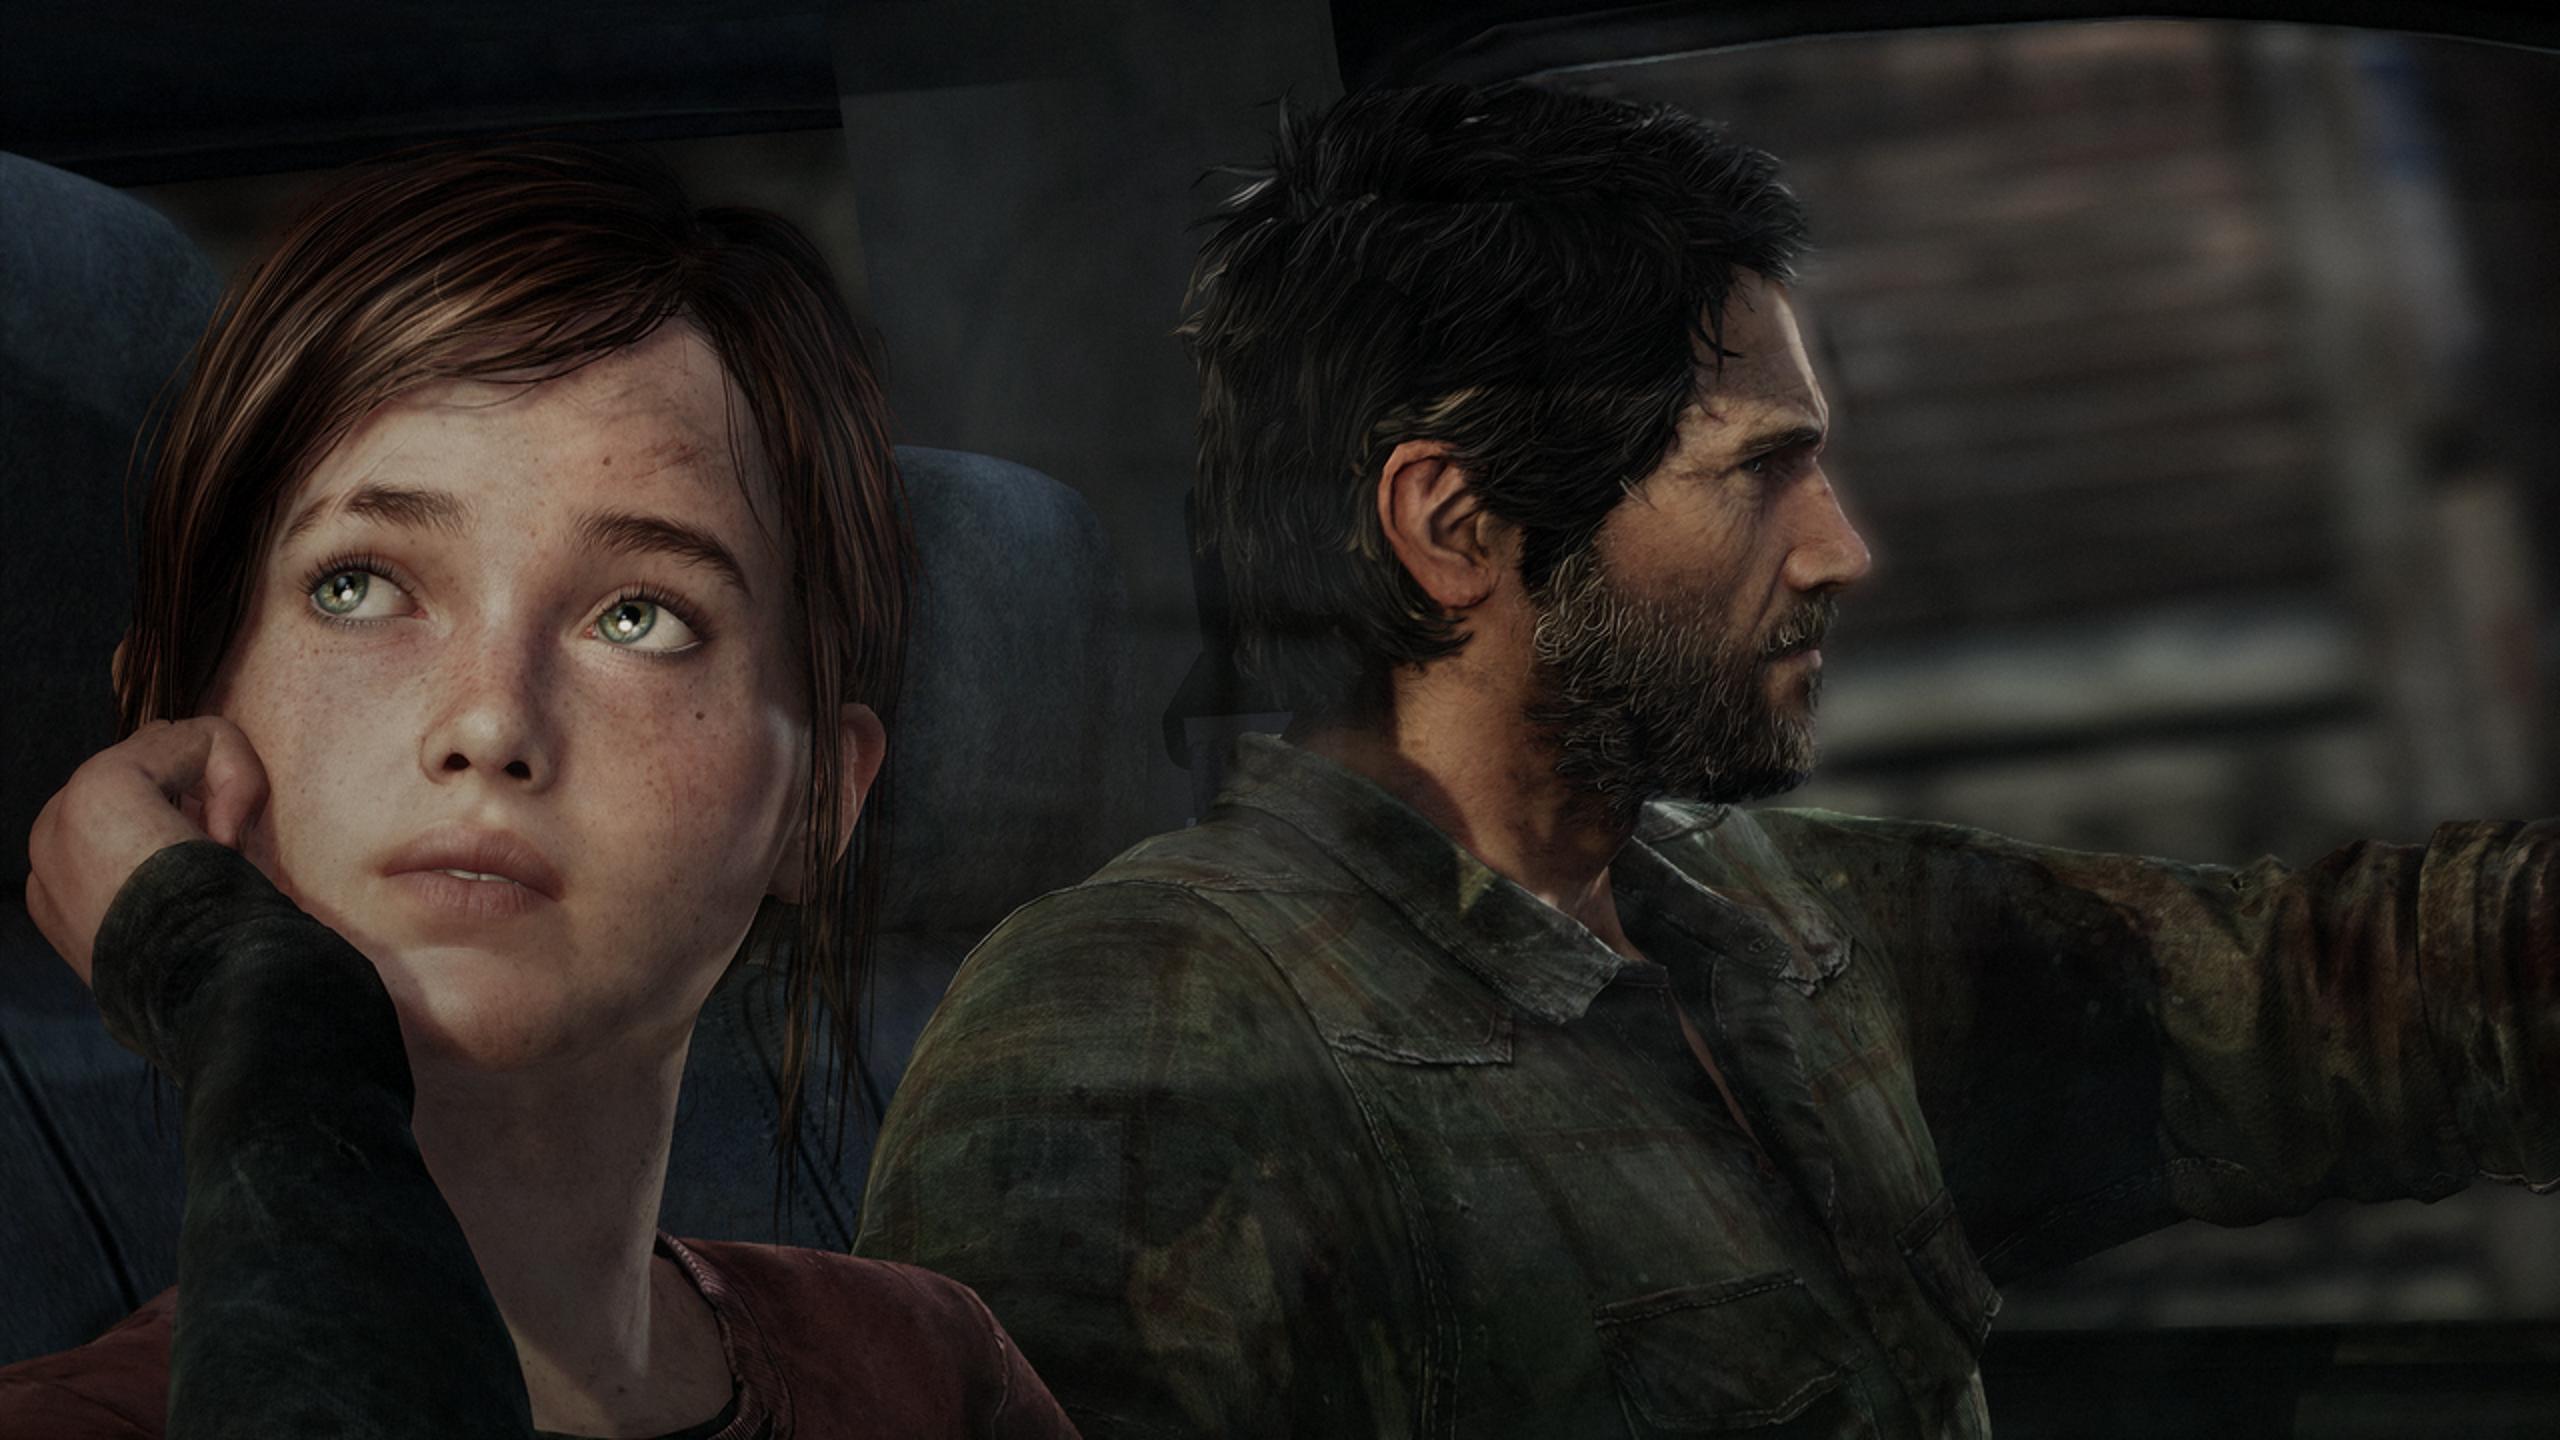 Download Wallpaper For 800x1280 Resolution The Last Of Us Hd Games Wallpaper Better